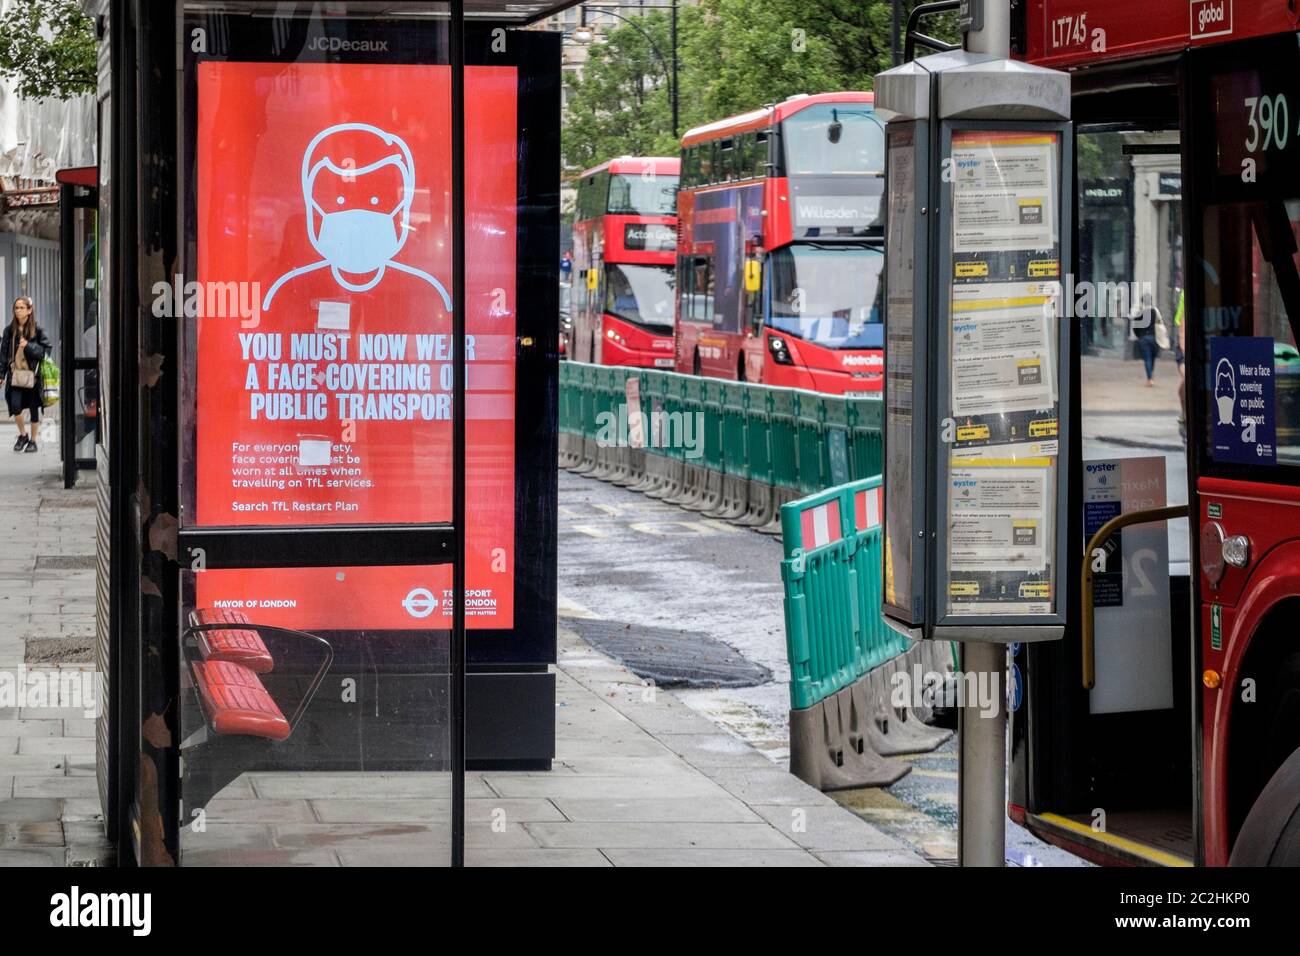 17th June 2020. Electronic signage at bus stop informs passengers that the wearing of face coverings is mandatory on all public transport. London UK. Stock Photo